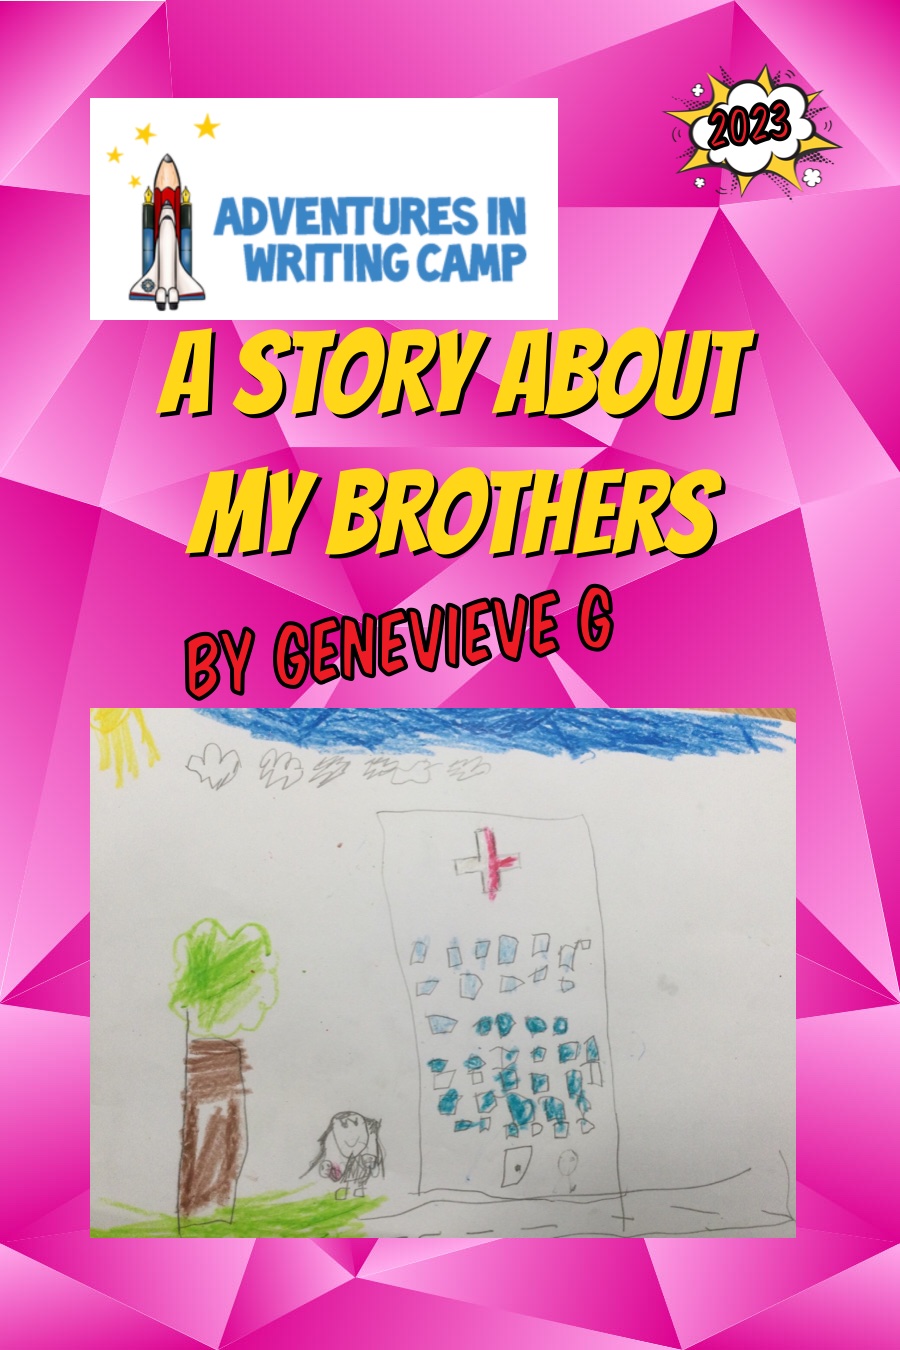 My Brothers by Genvieve Gene G